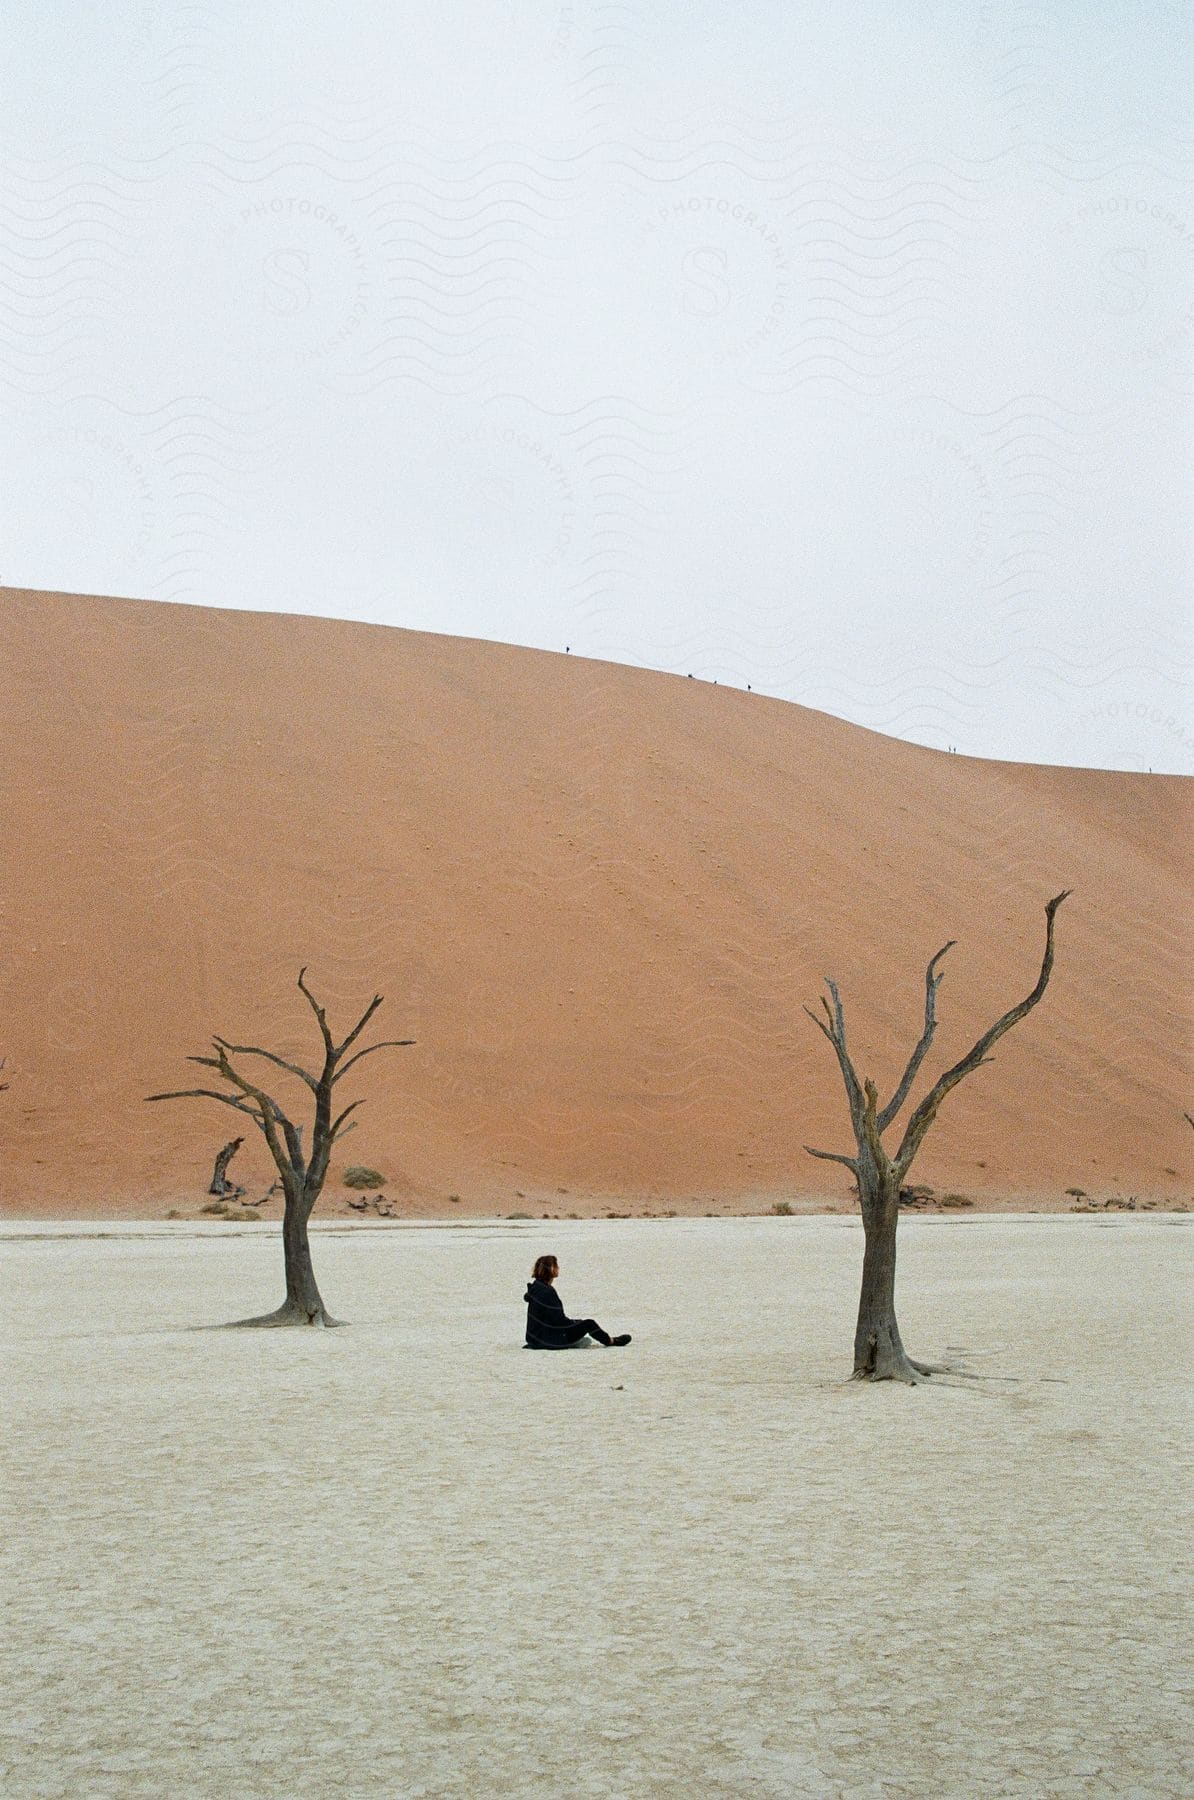 A person stands alone in a desert landscape surrounded by trees and vegetation